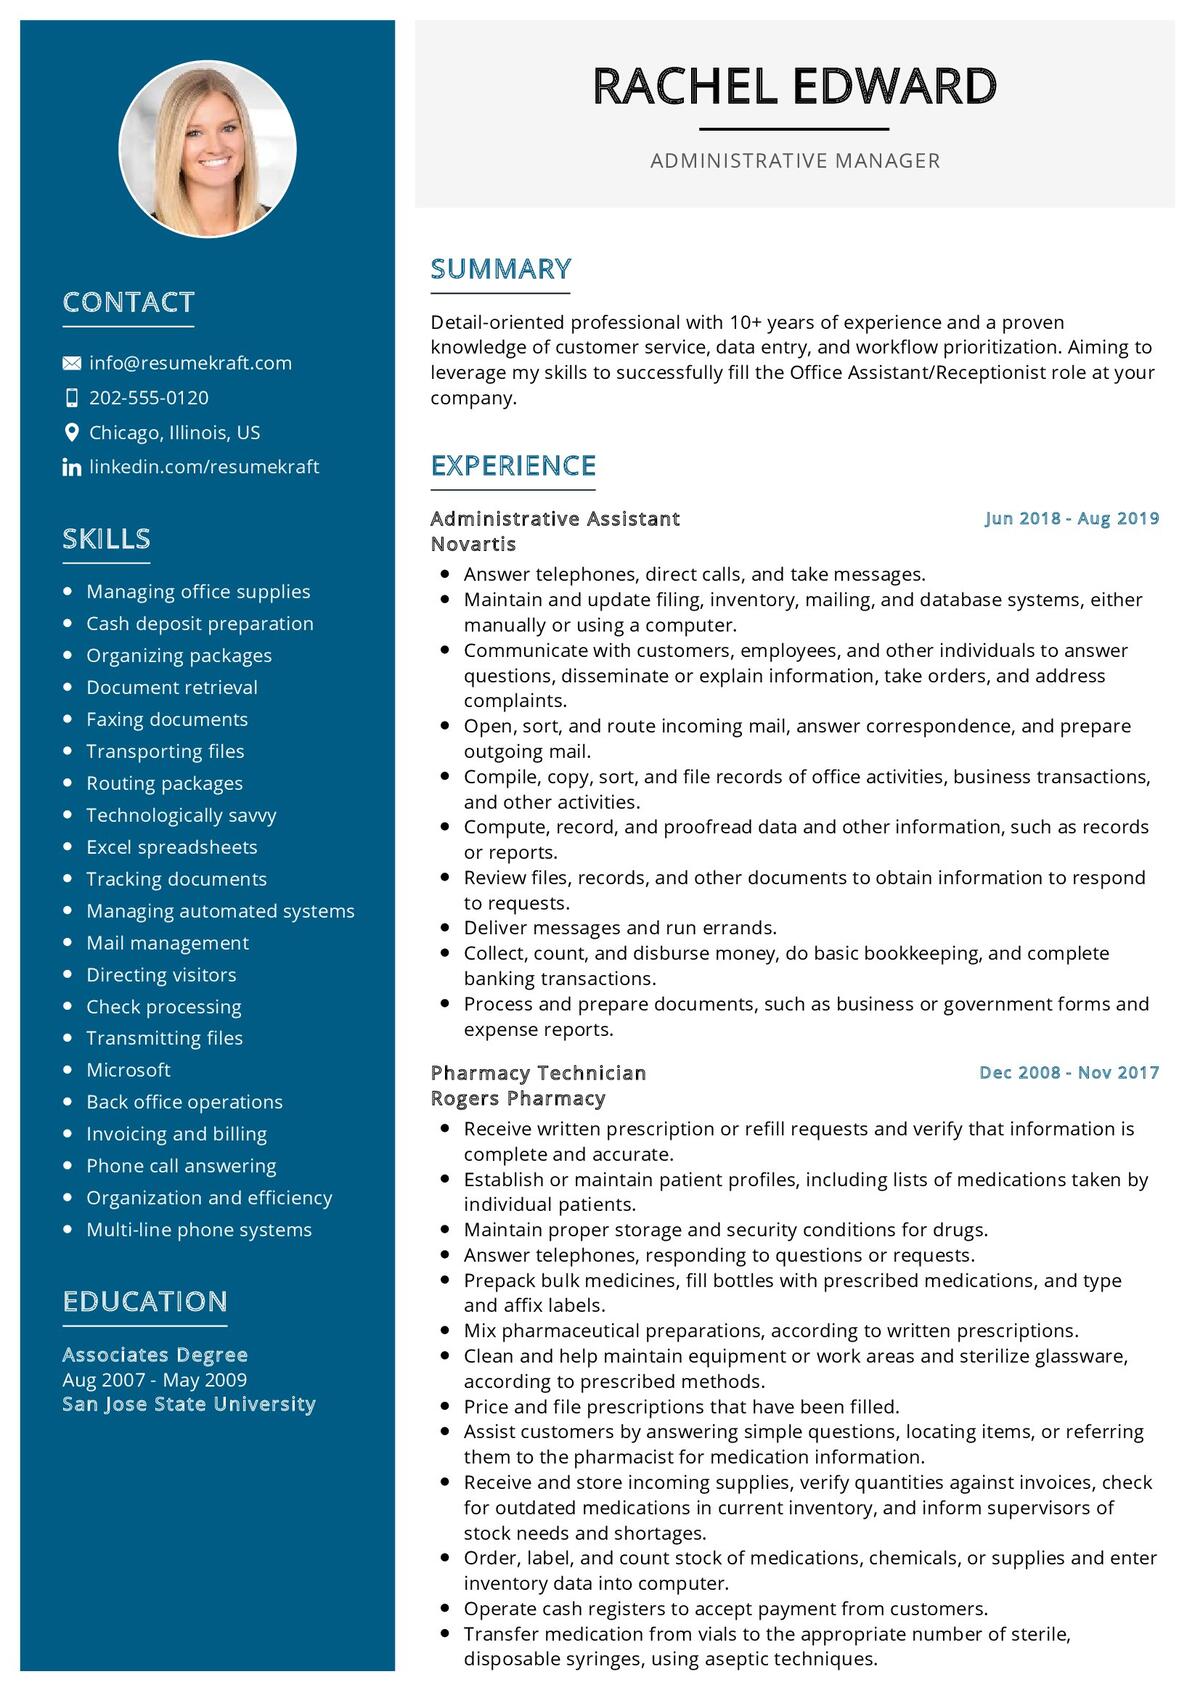 50+ Good CV Examples with Writing Guide 2021 - ResumeKraft